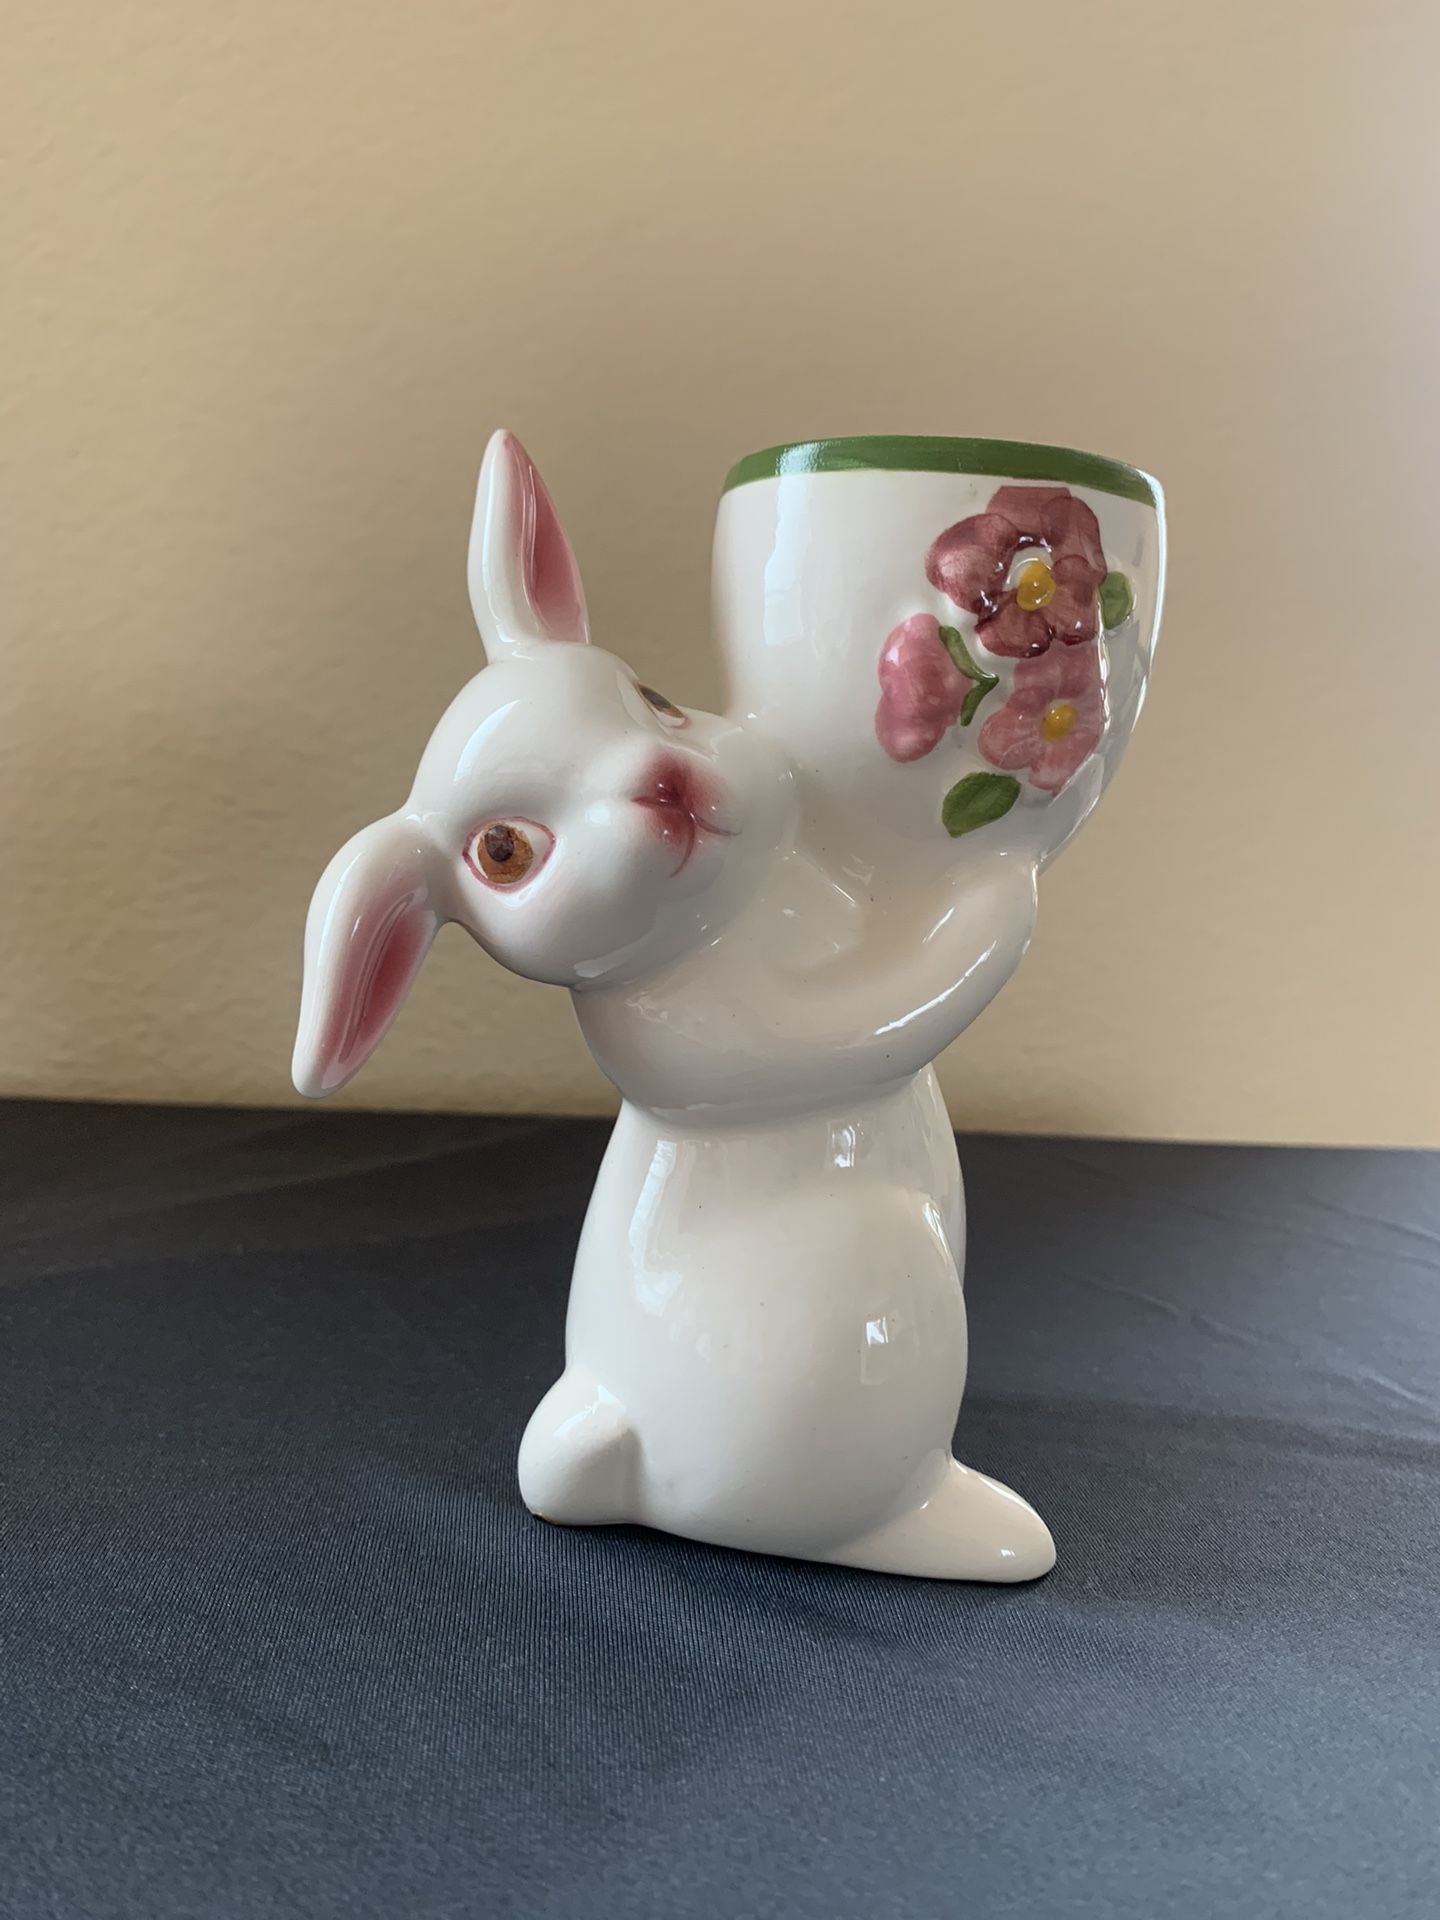 Vintage Avon Sunny Bunny Ceramic Rabbit Candle Holder And Candle